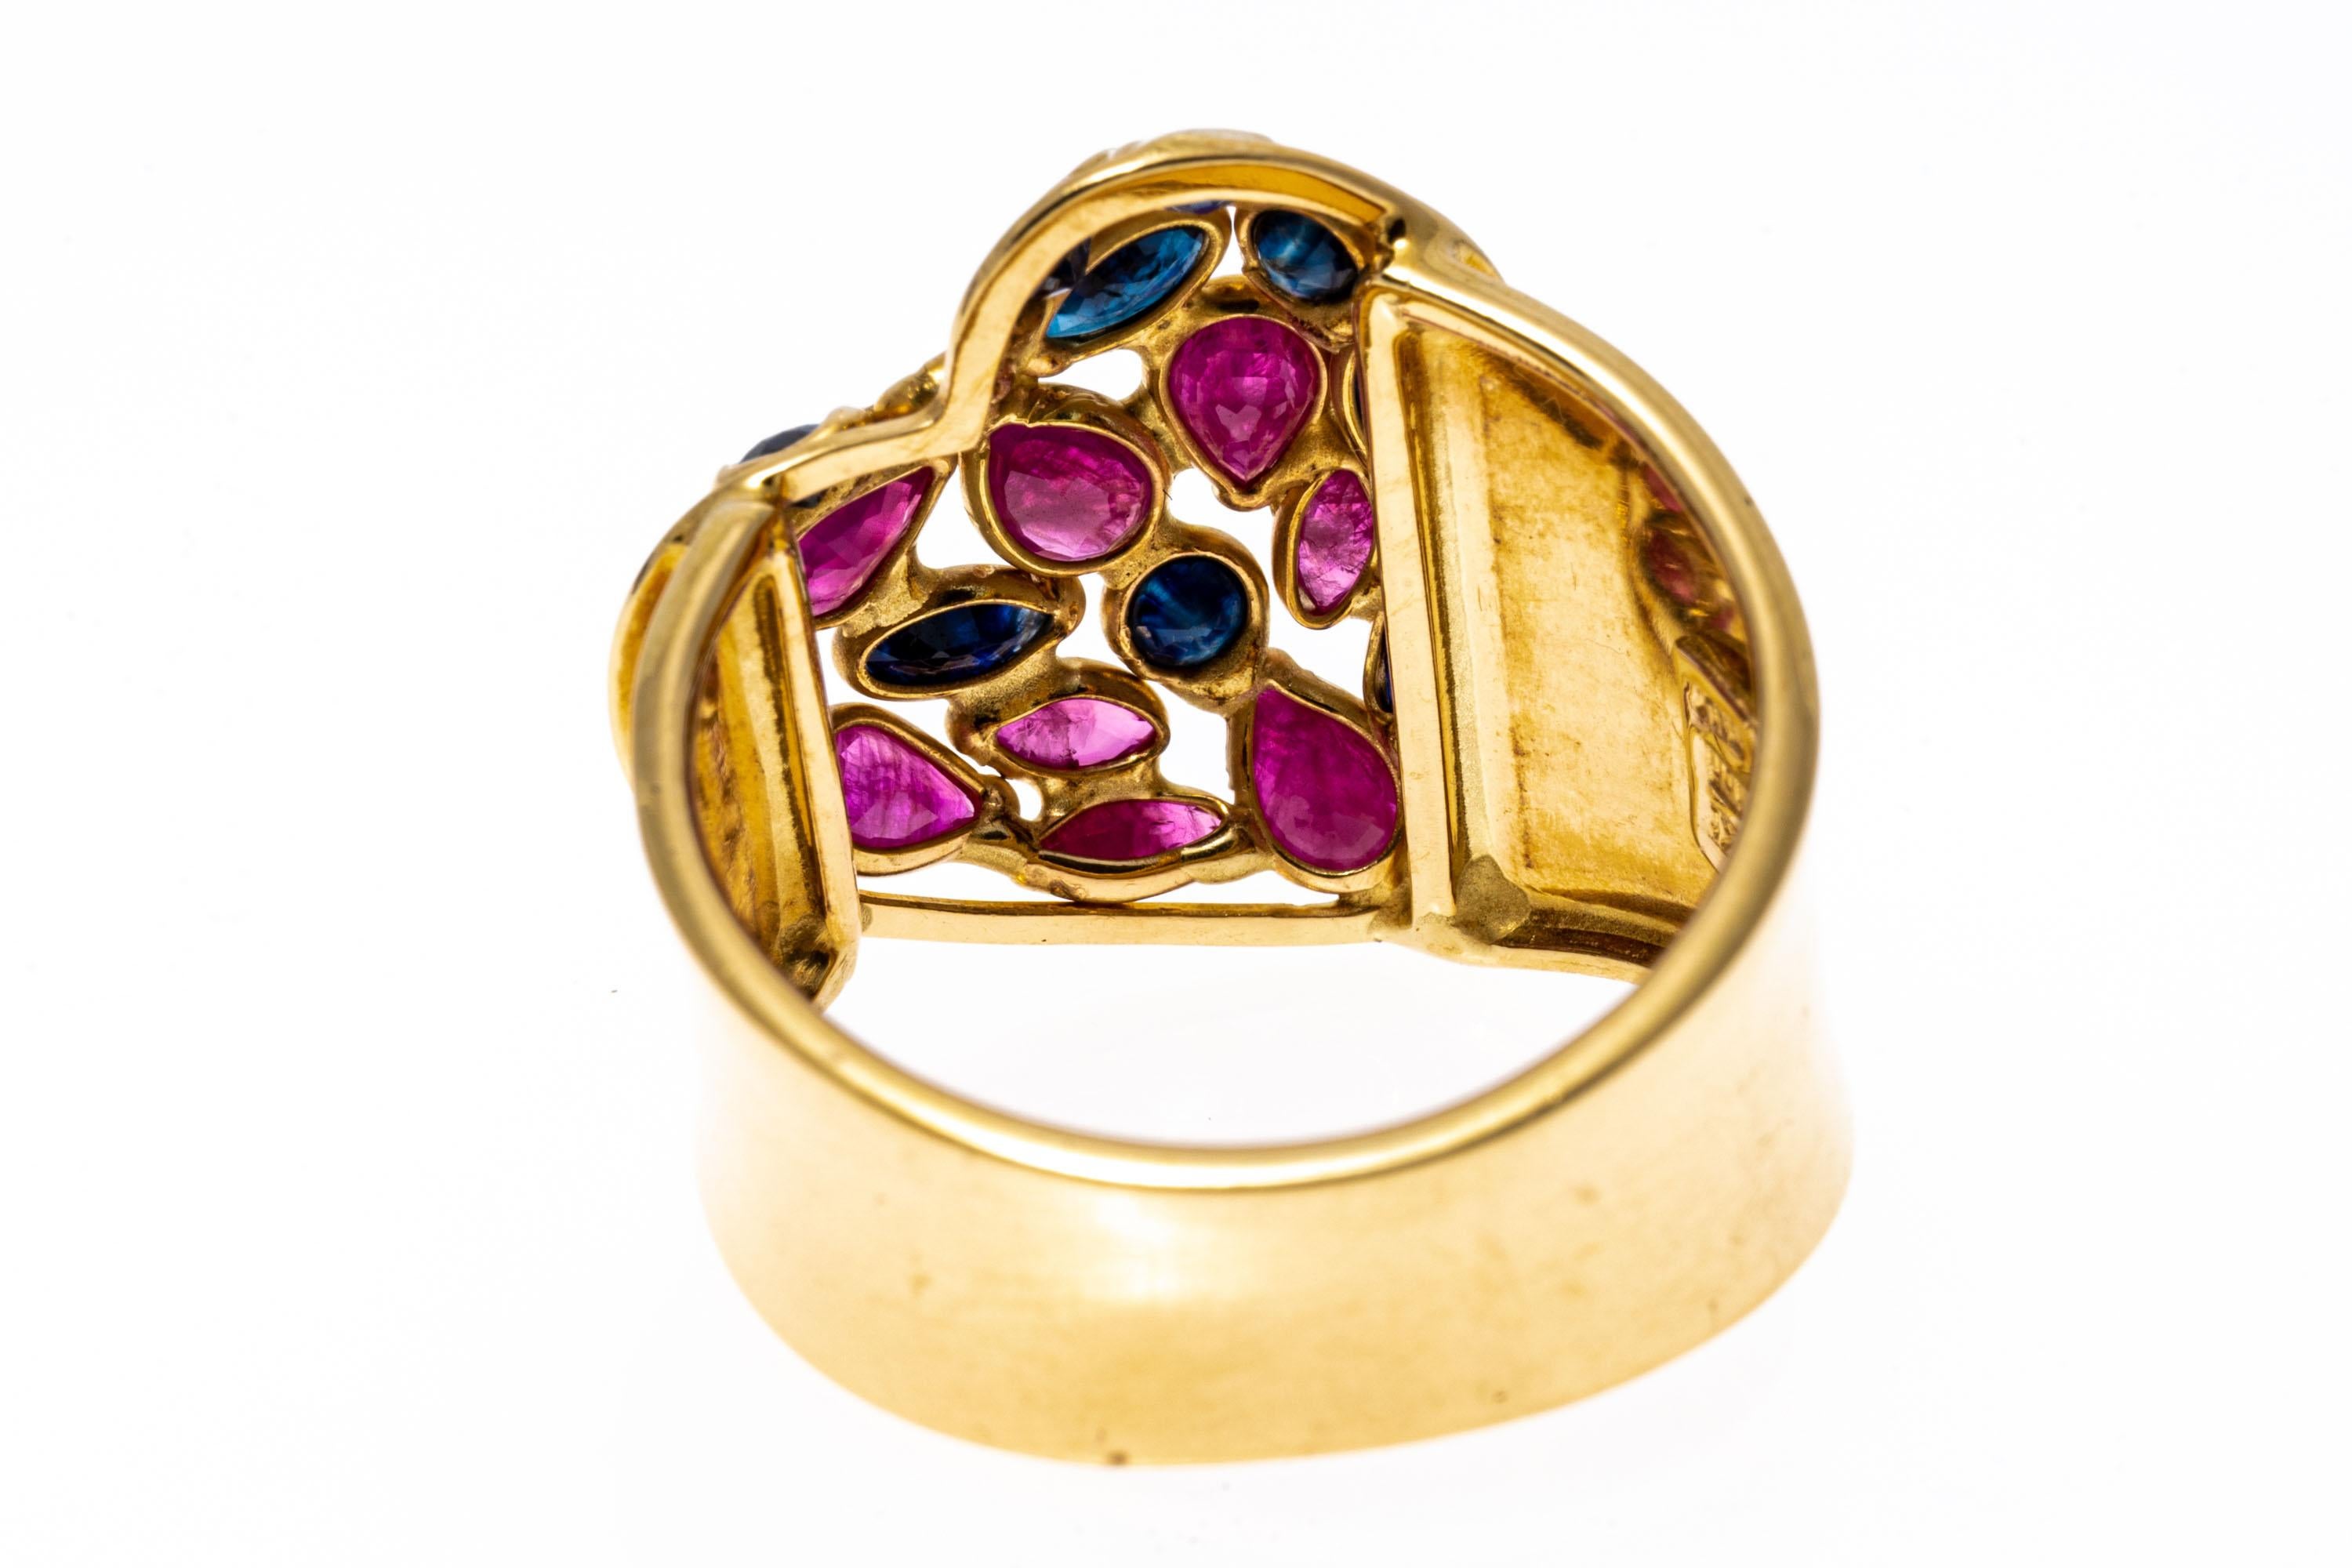 Women's 14k Wide Stained Glass Heart Motif Ring Set with Rubies and Sapphires For Sale